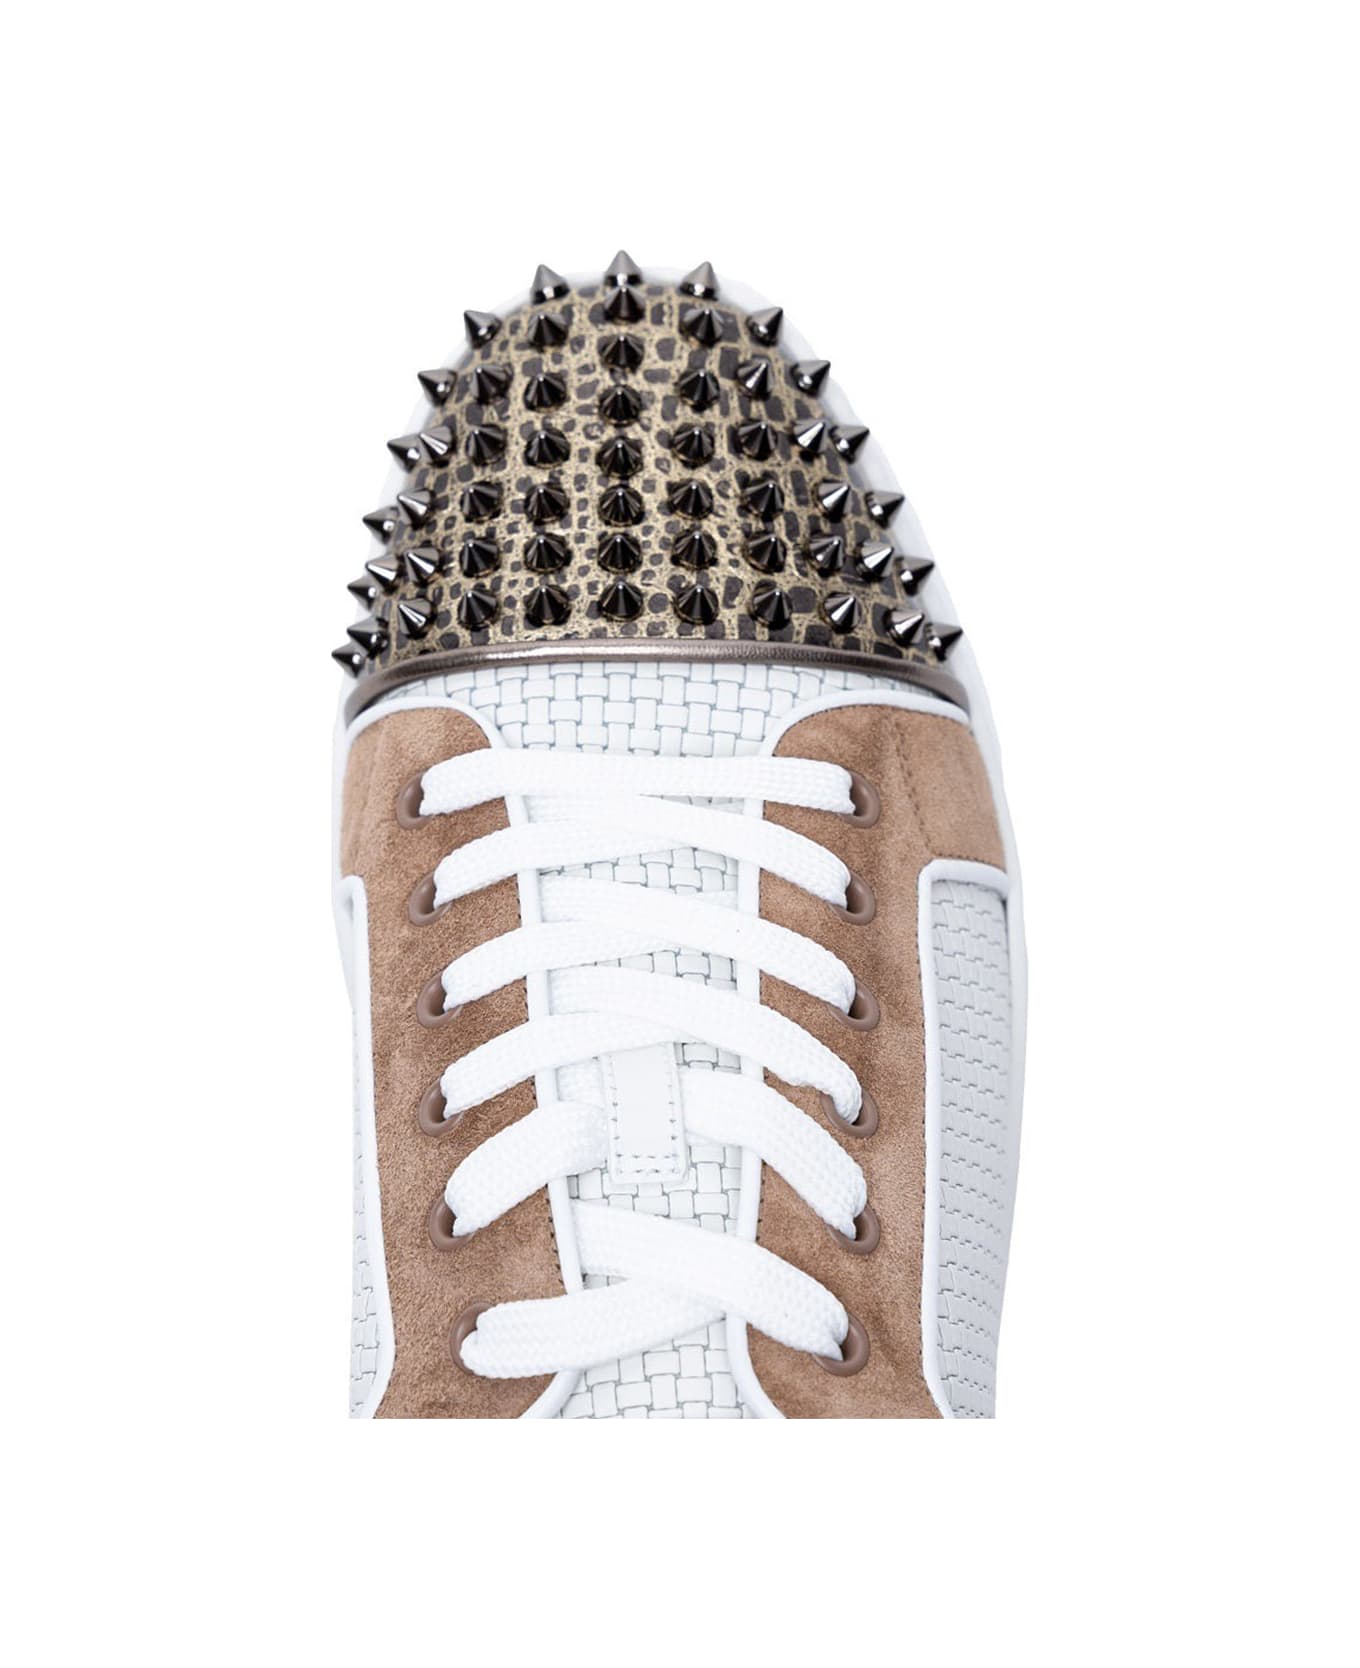 Christian Louboutin Leather Sneakers With Spikes - MULTI